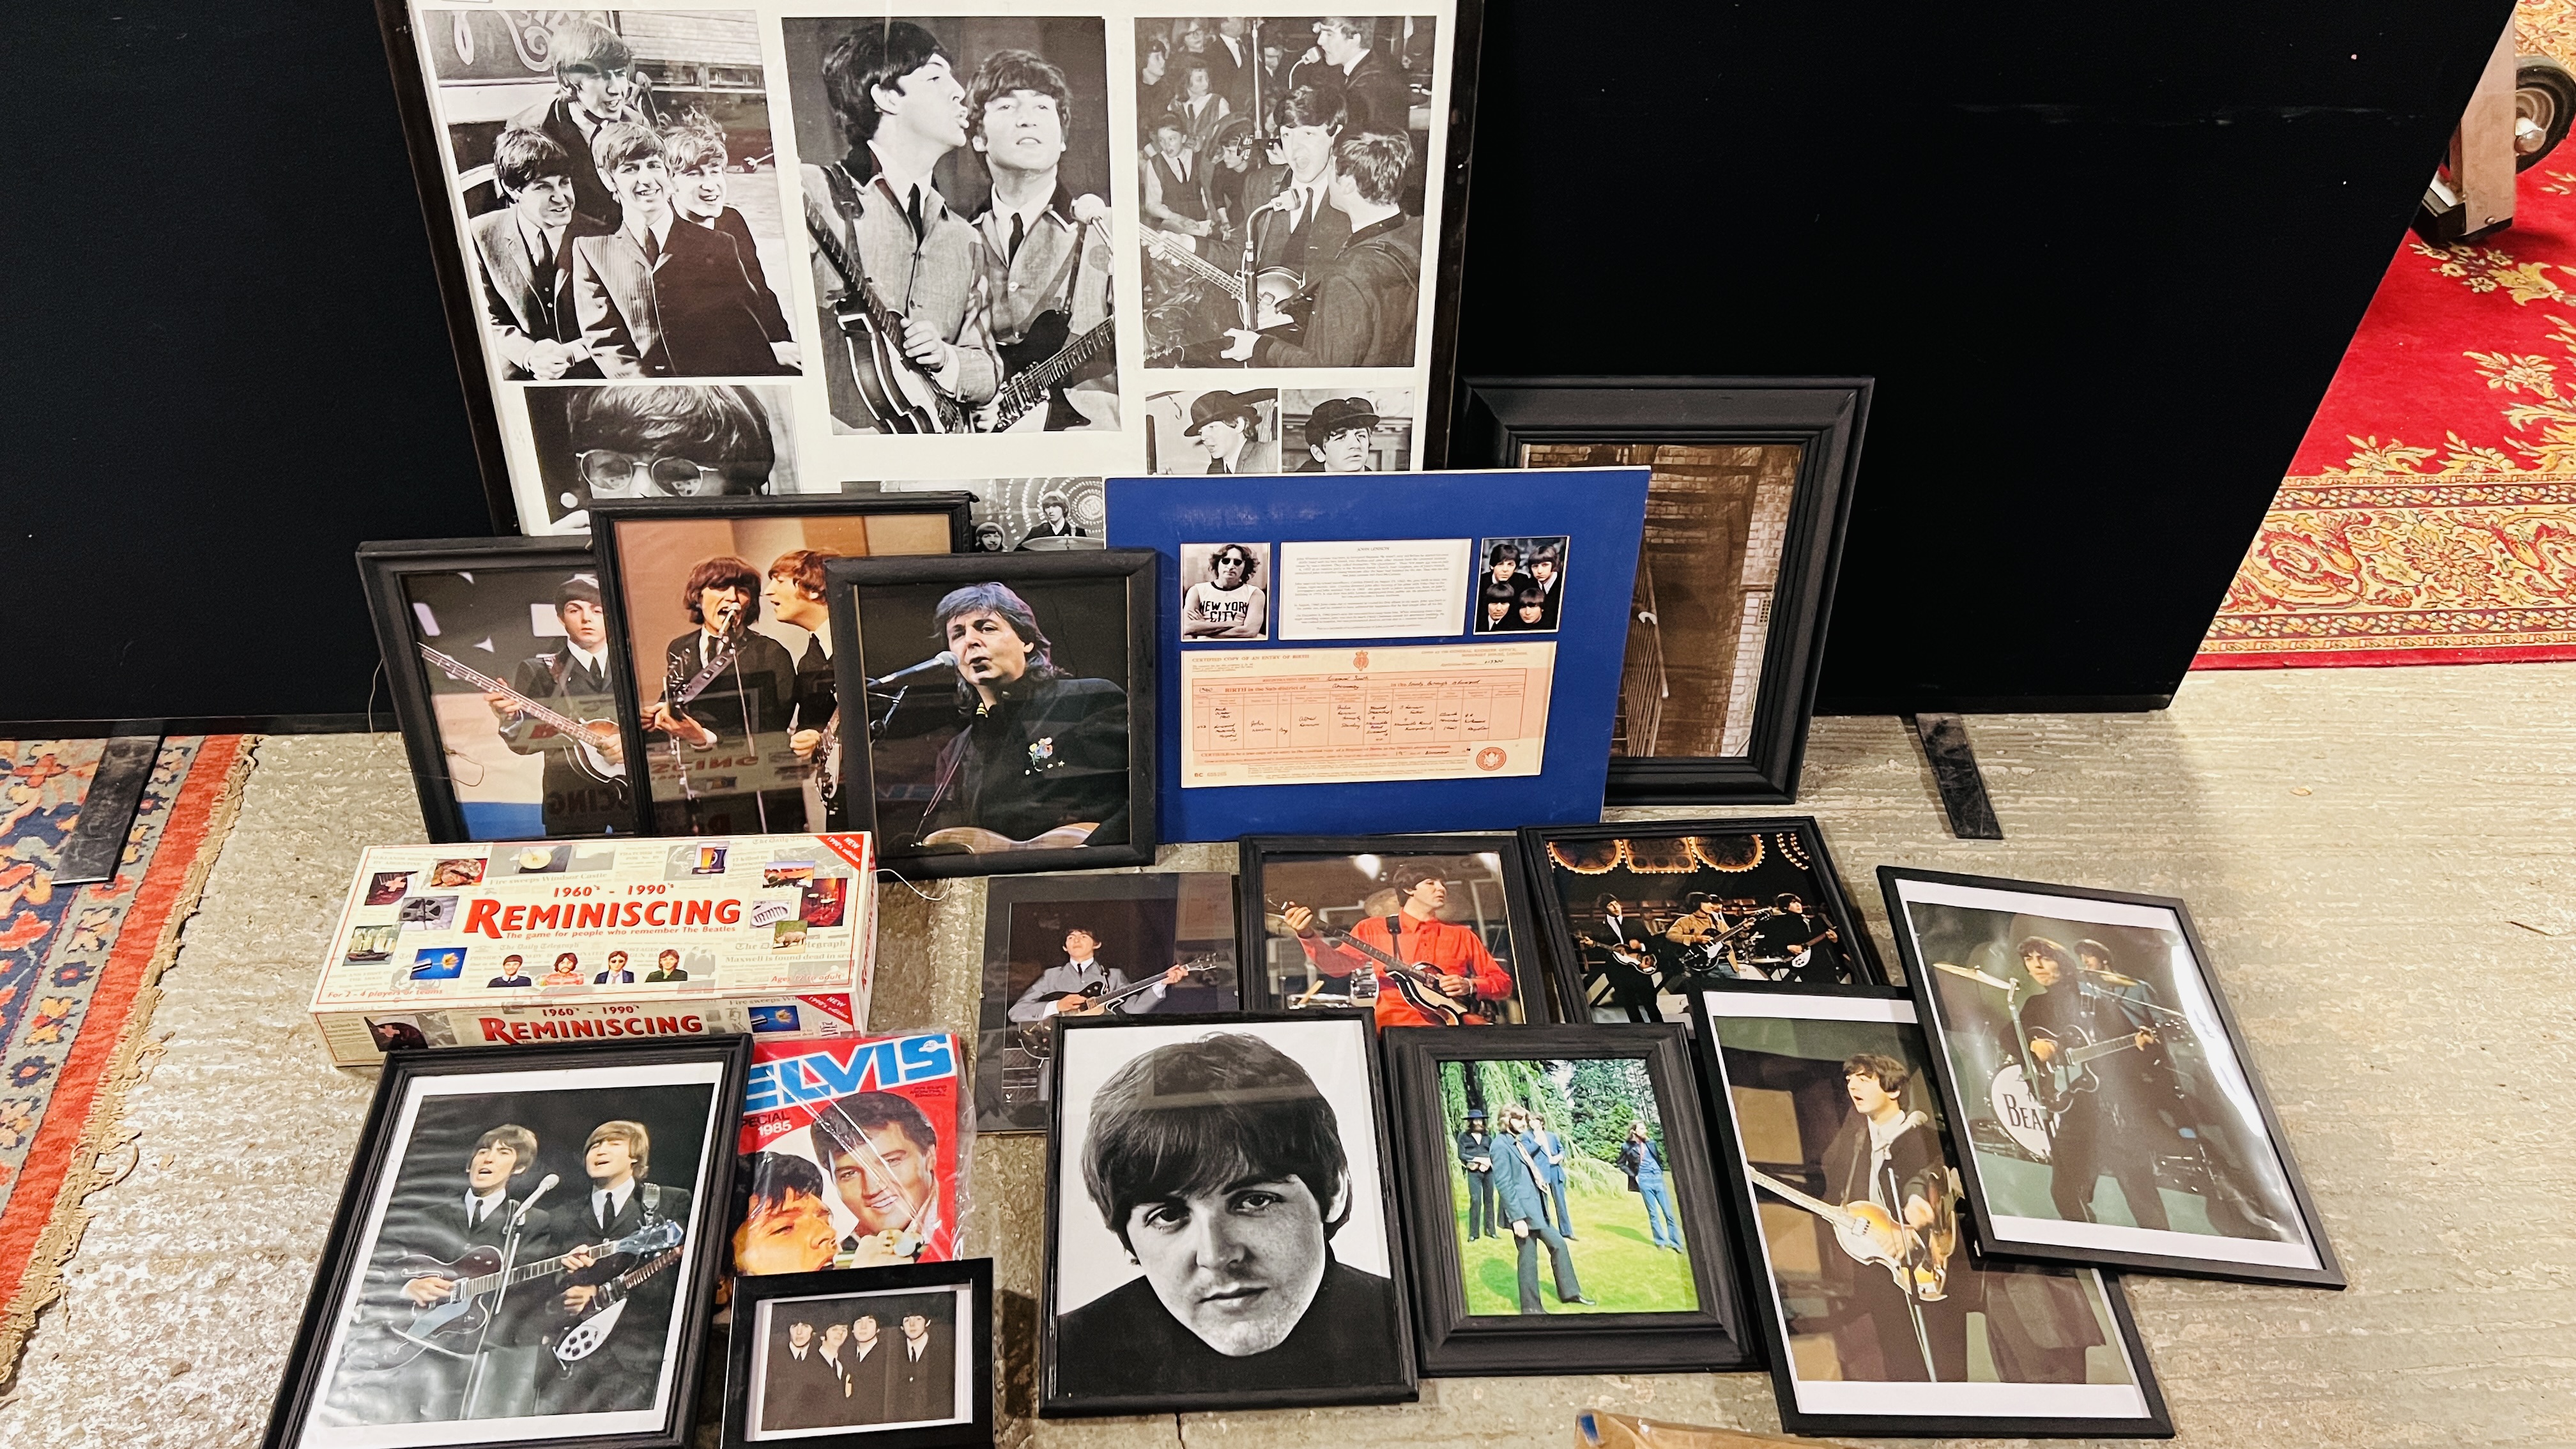 A COLLECTION OF MUSIC MEMORABILIA TO INCLUDE FRAMED PICTURES AND PRINTS JOHN LENNON AND THE BEATLES